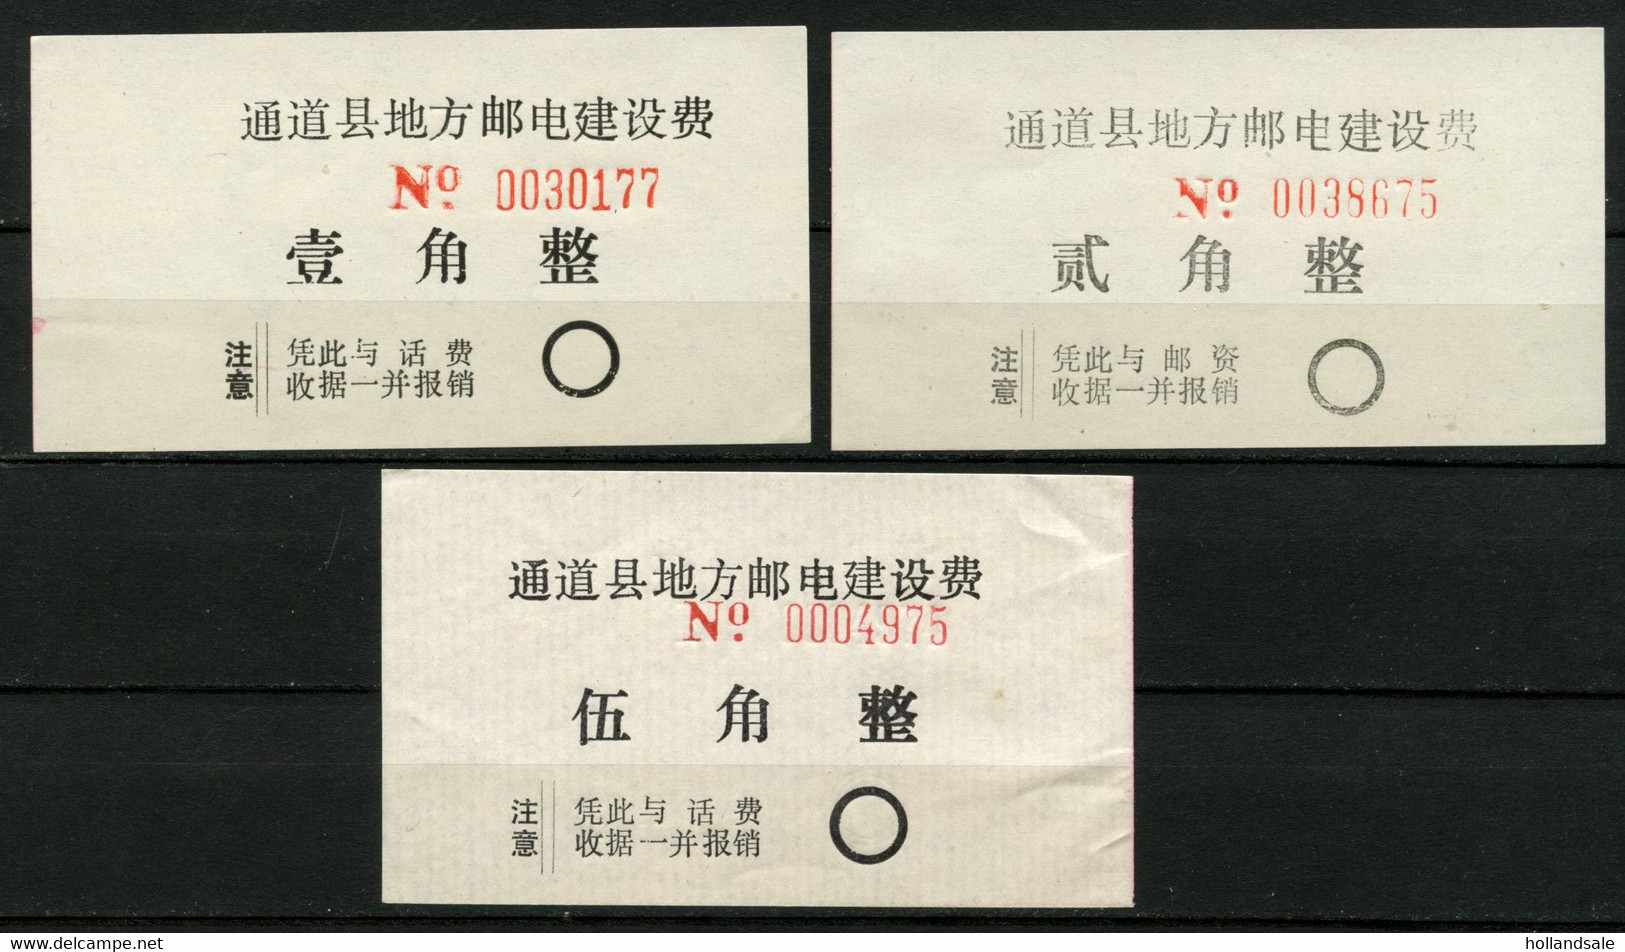 CHINA PRC ADDED CHARGE LABELS - 10f - 50f :Labels Of Chengzhou City, Hunan Prov. D&O # 13-0669/0671. - Strafport